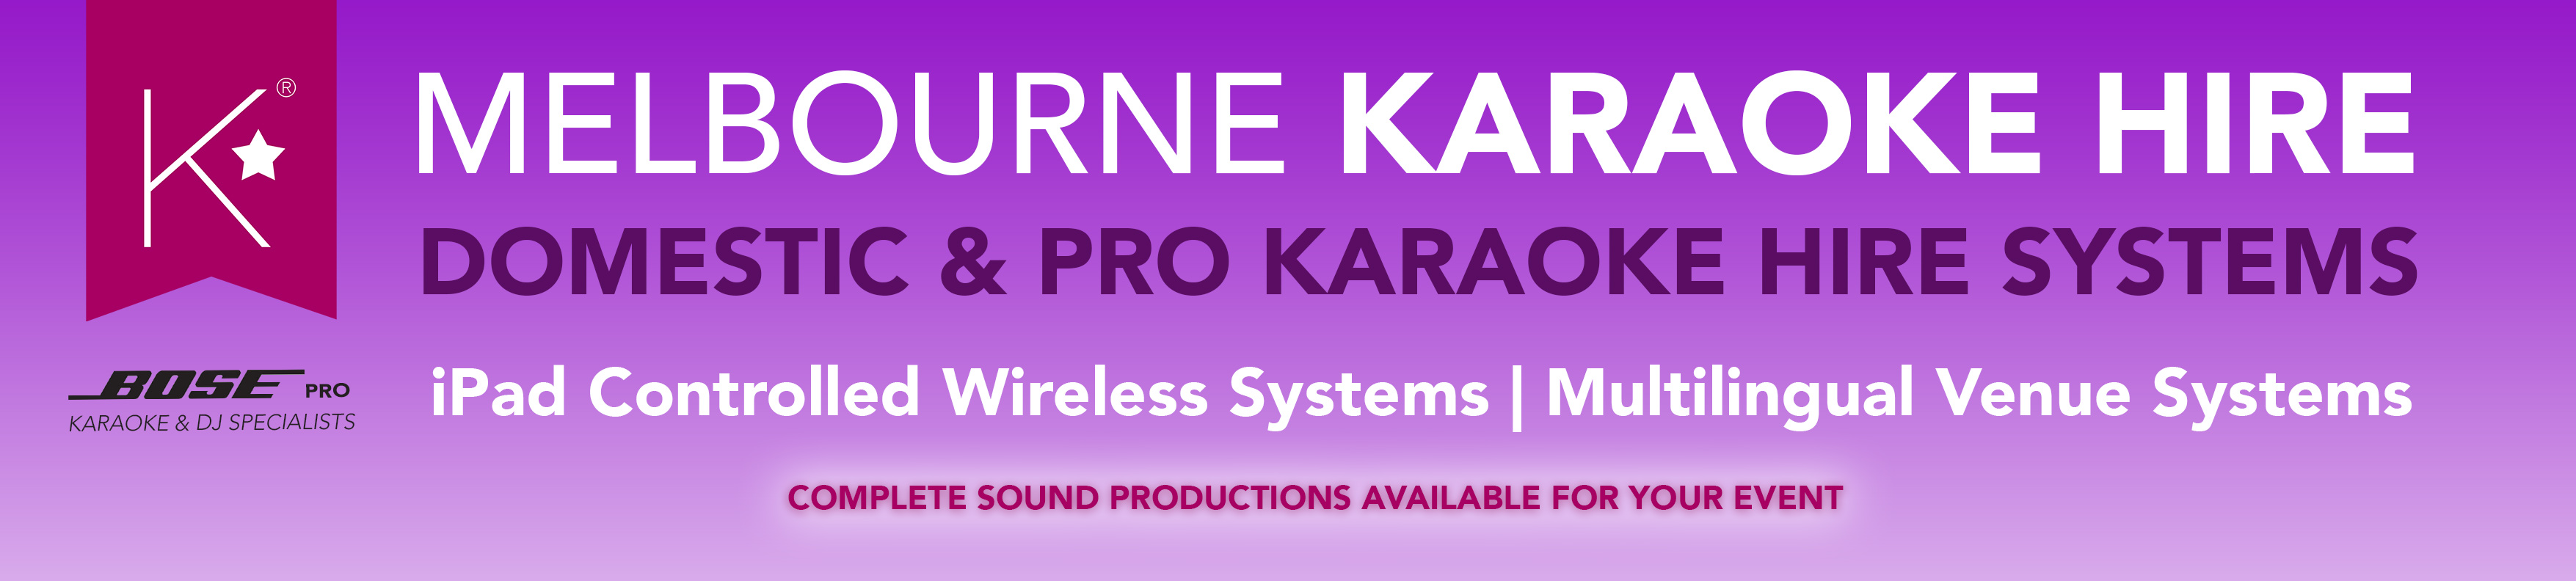 Melbourne Karaoke Hire, karaoke systems for parties, weddings, functions. Battery powered, bluetooth, wireless microphones available. Call for custom options. Bose Pro Specialists!